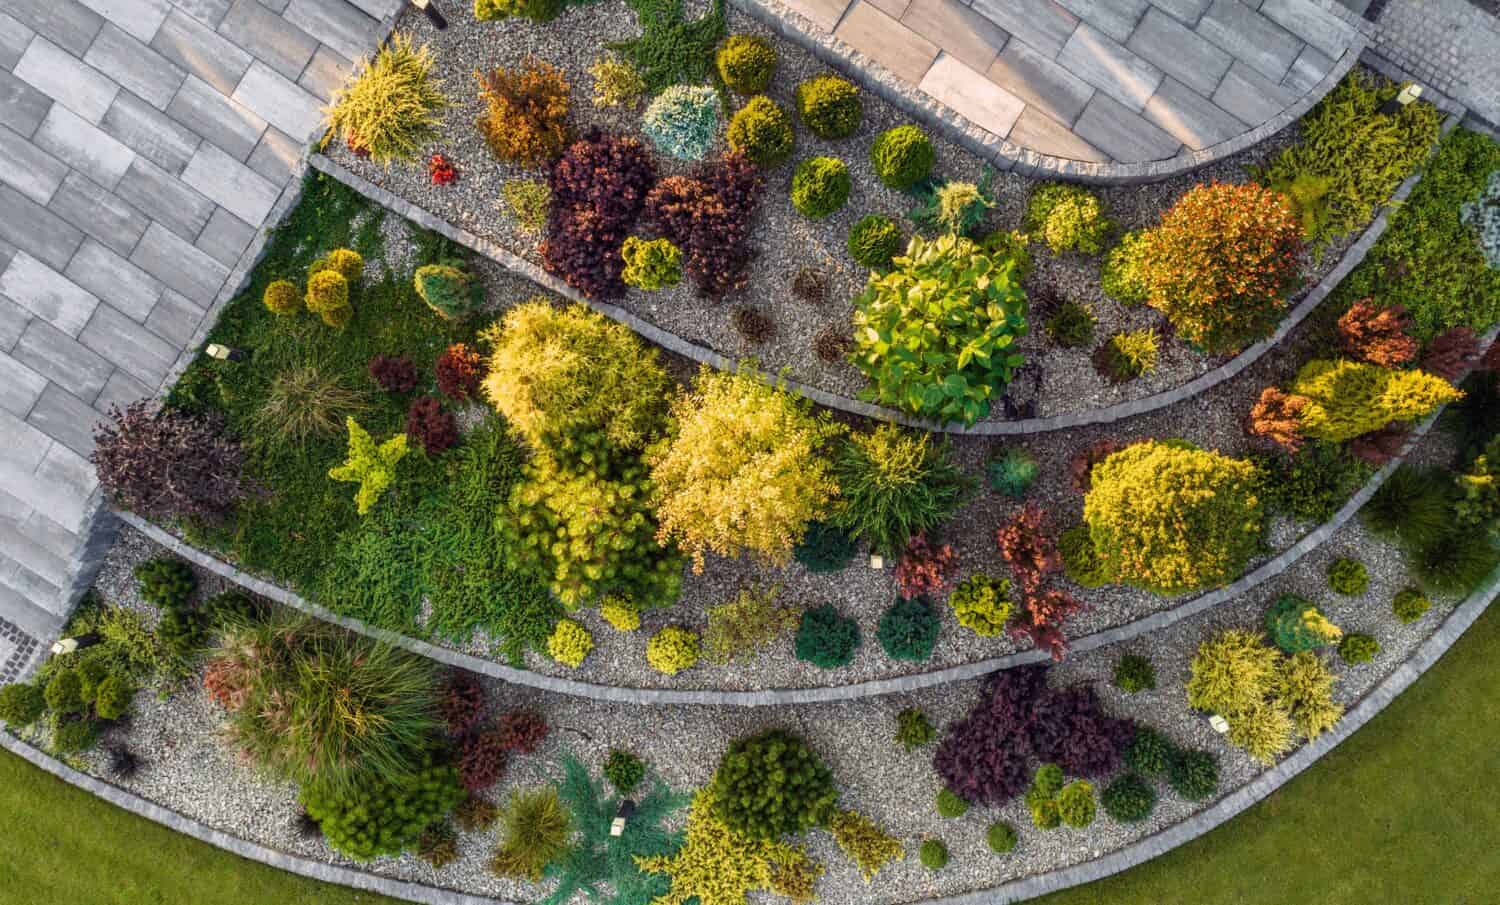 Aerial View of Residential Rockery Backyard Garden. Landscaping and Gardening Industry.